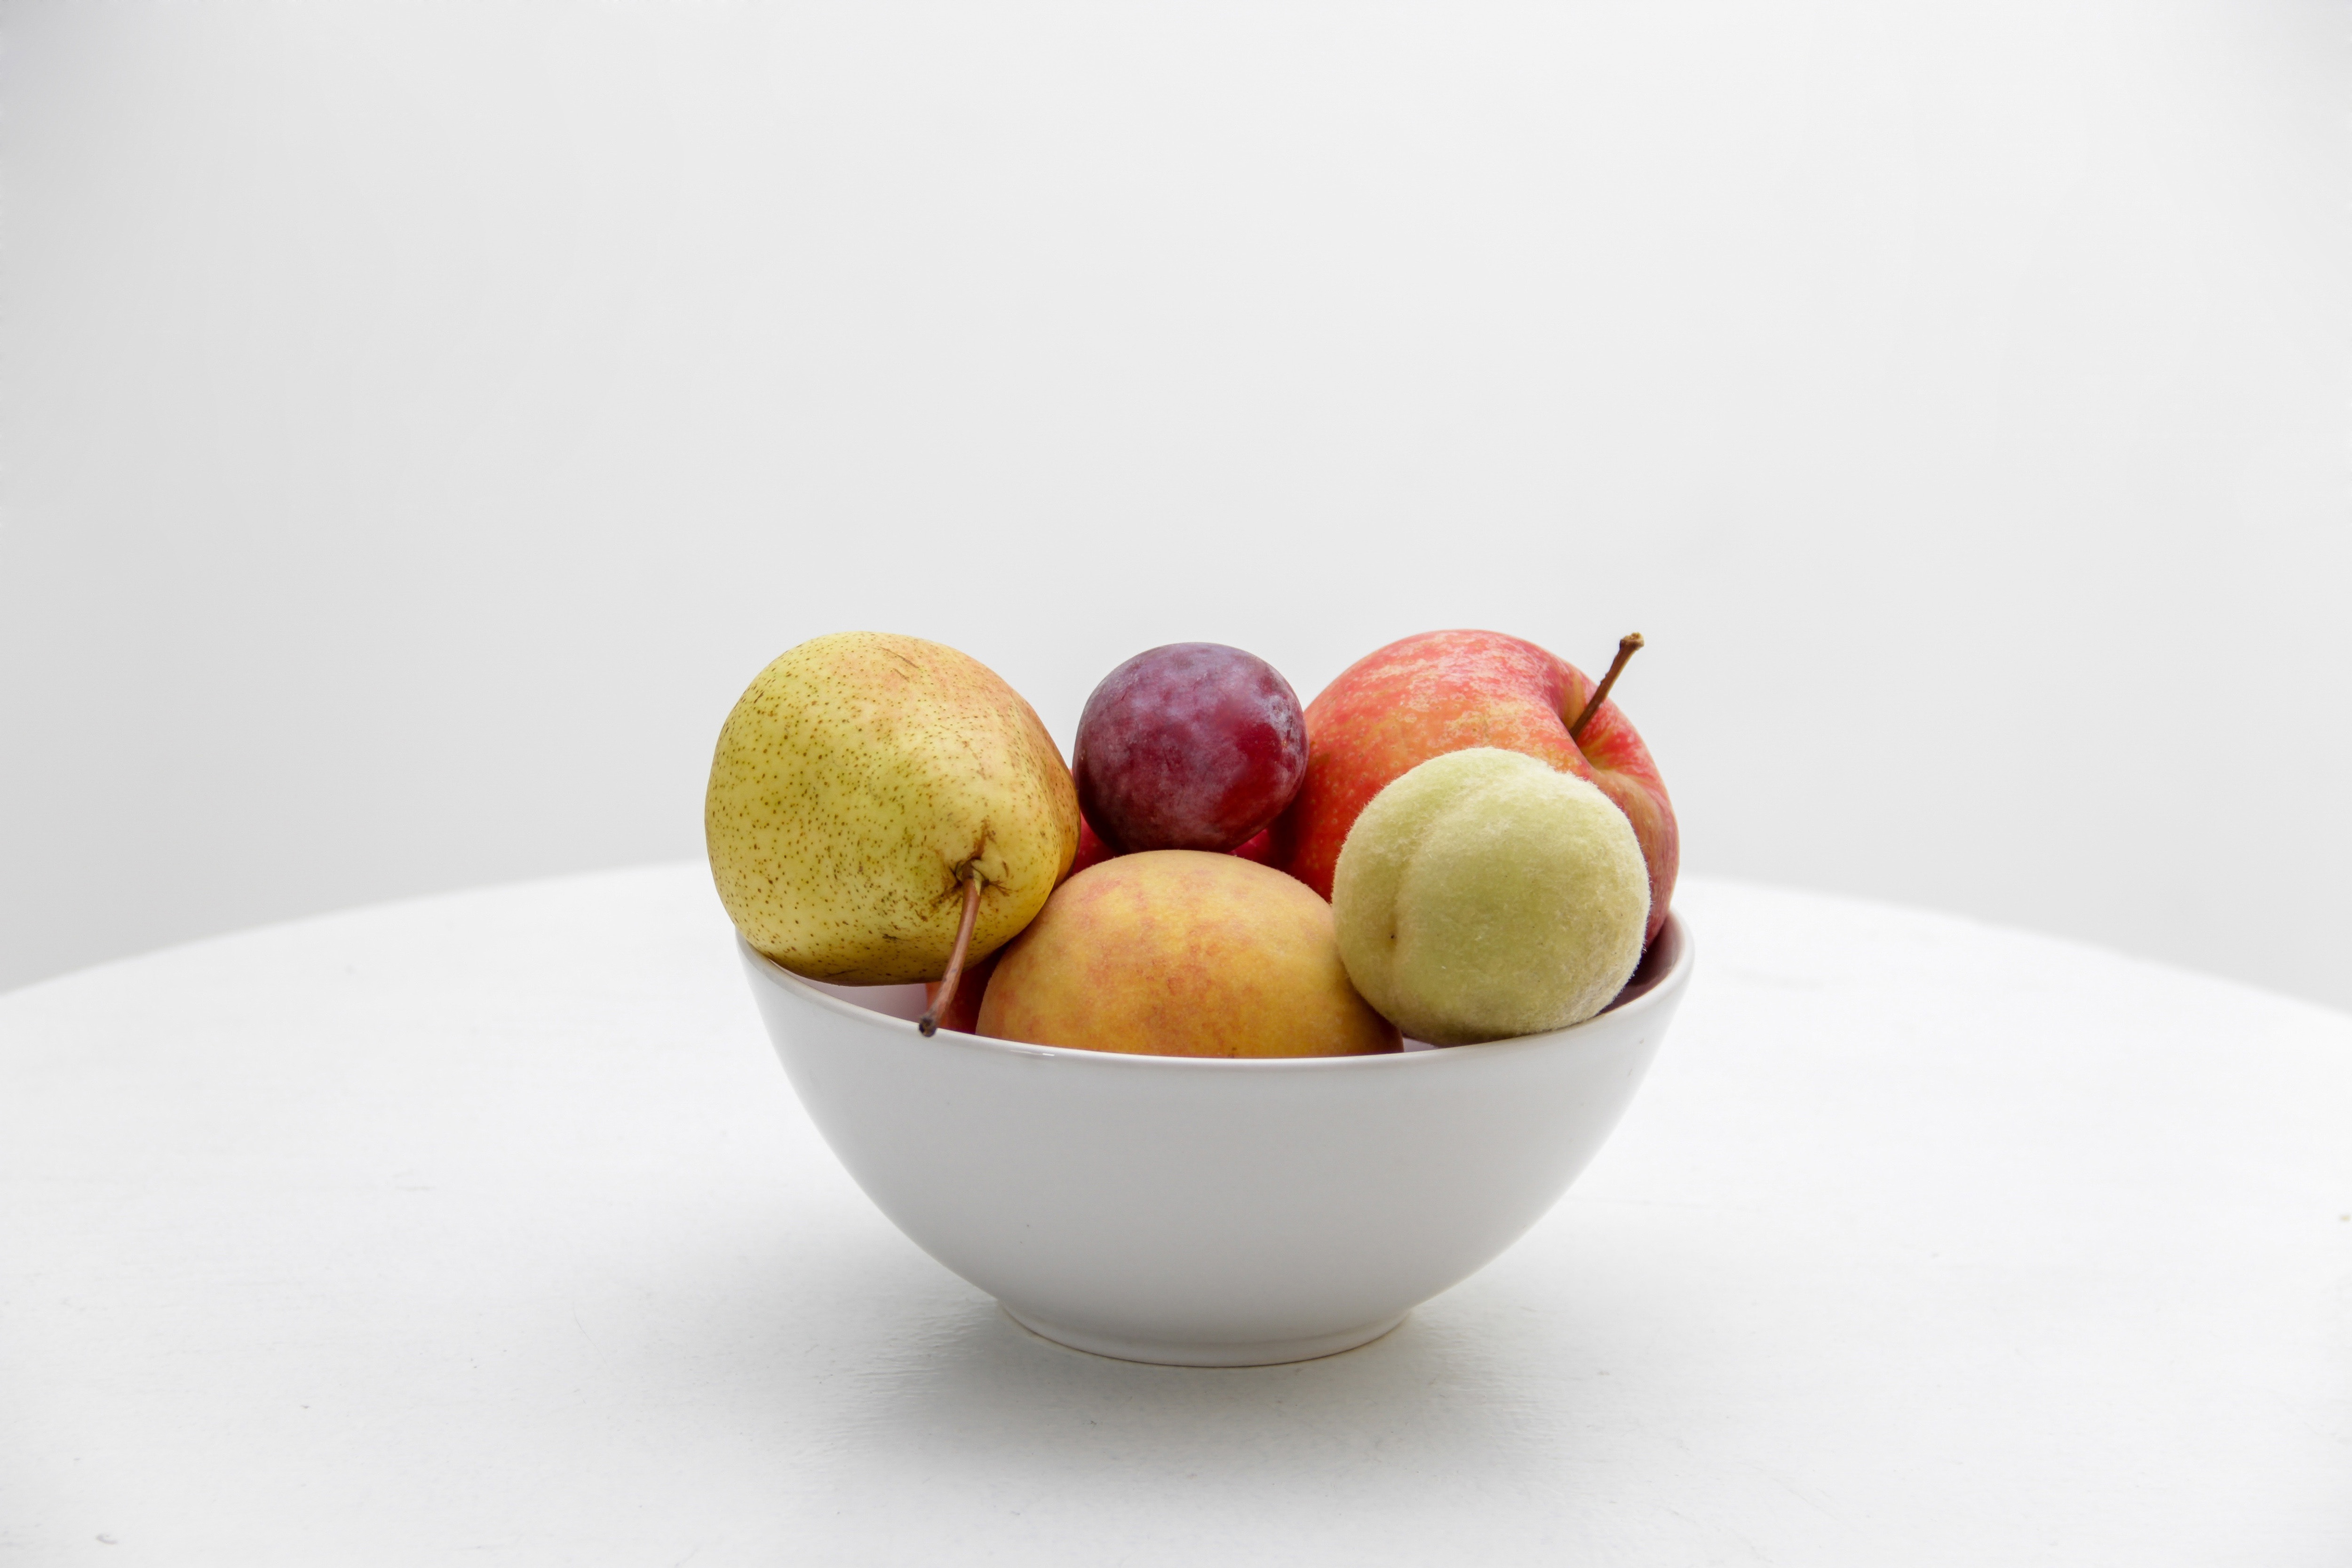 Minimal Fruit Bowl Free Stock Image and Picture.